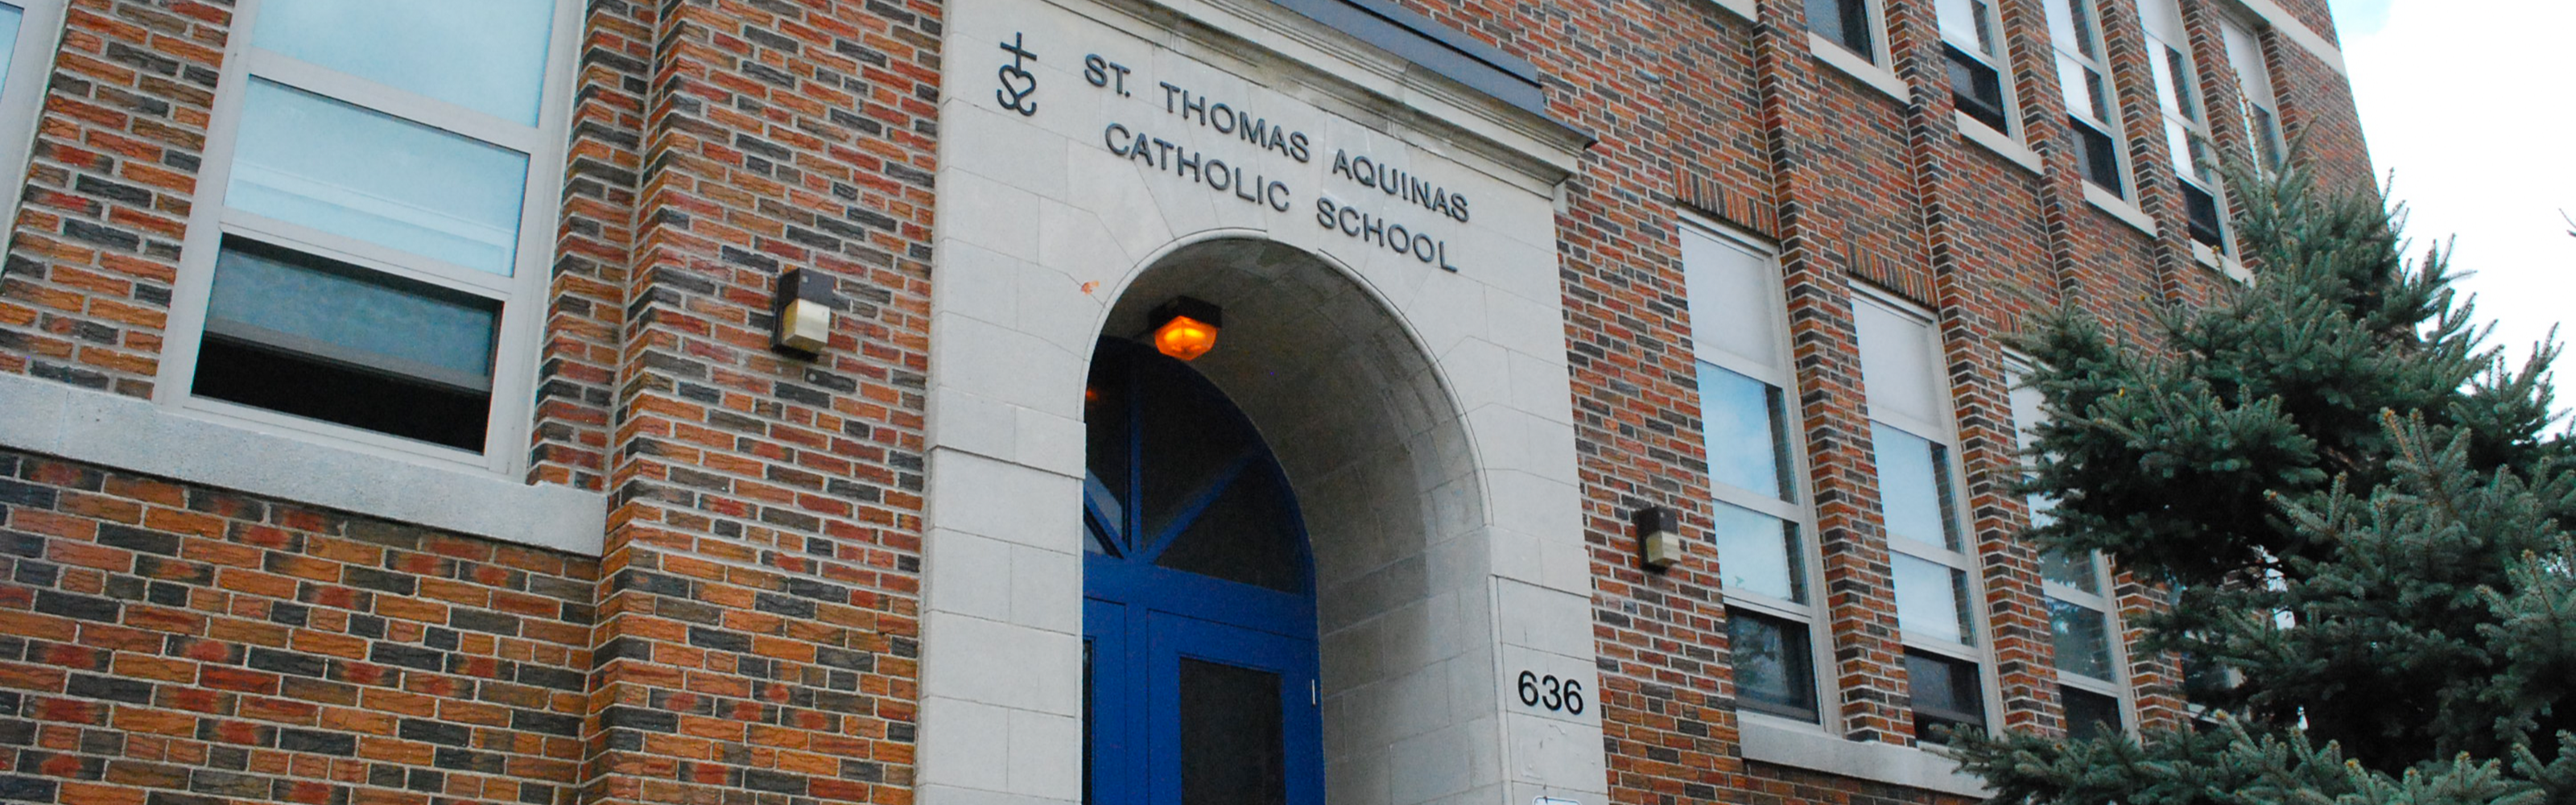 The front of the St. Thomas Aquinas Catholic School building.